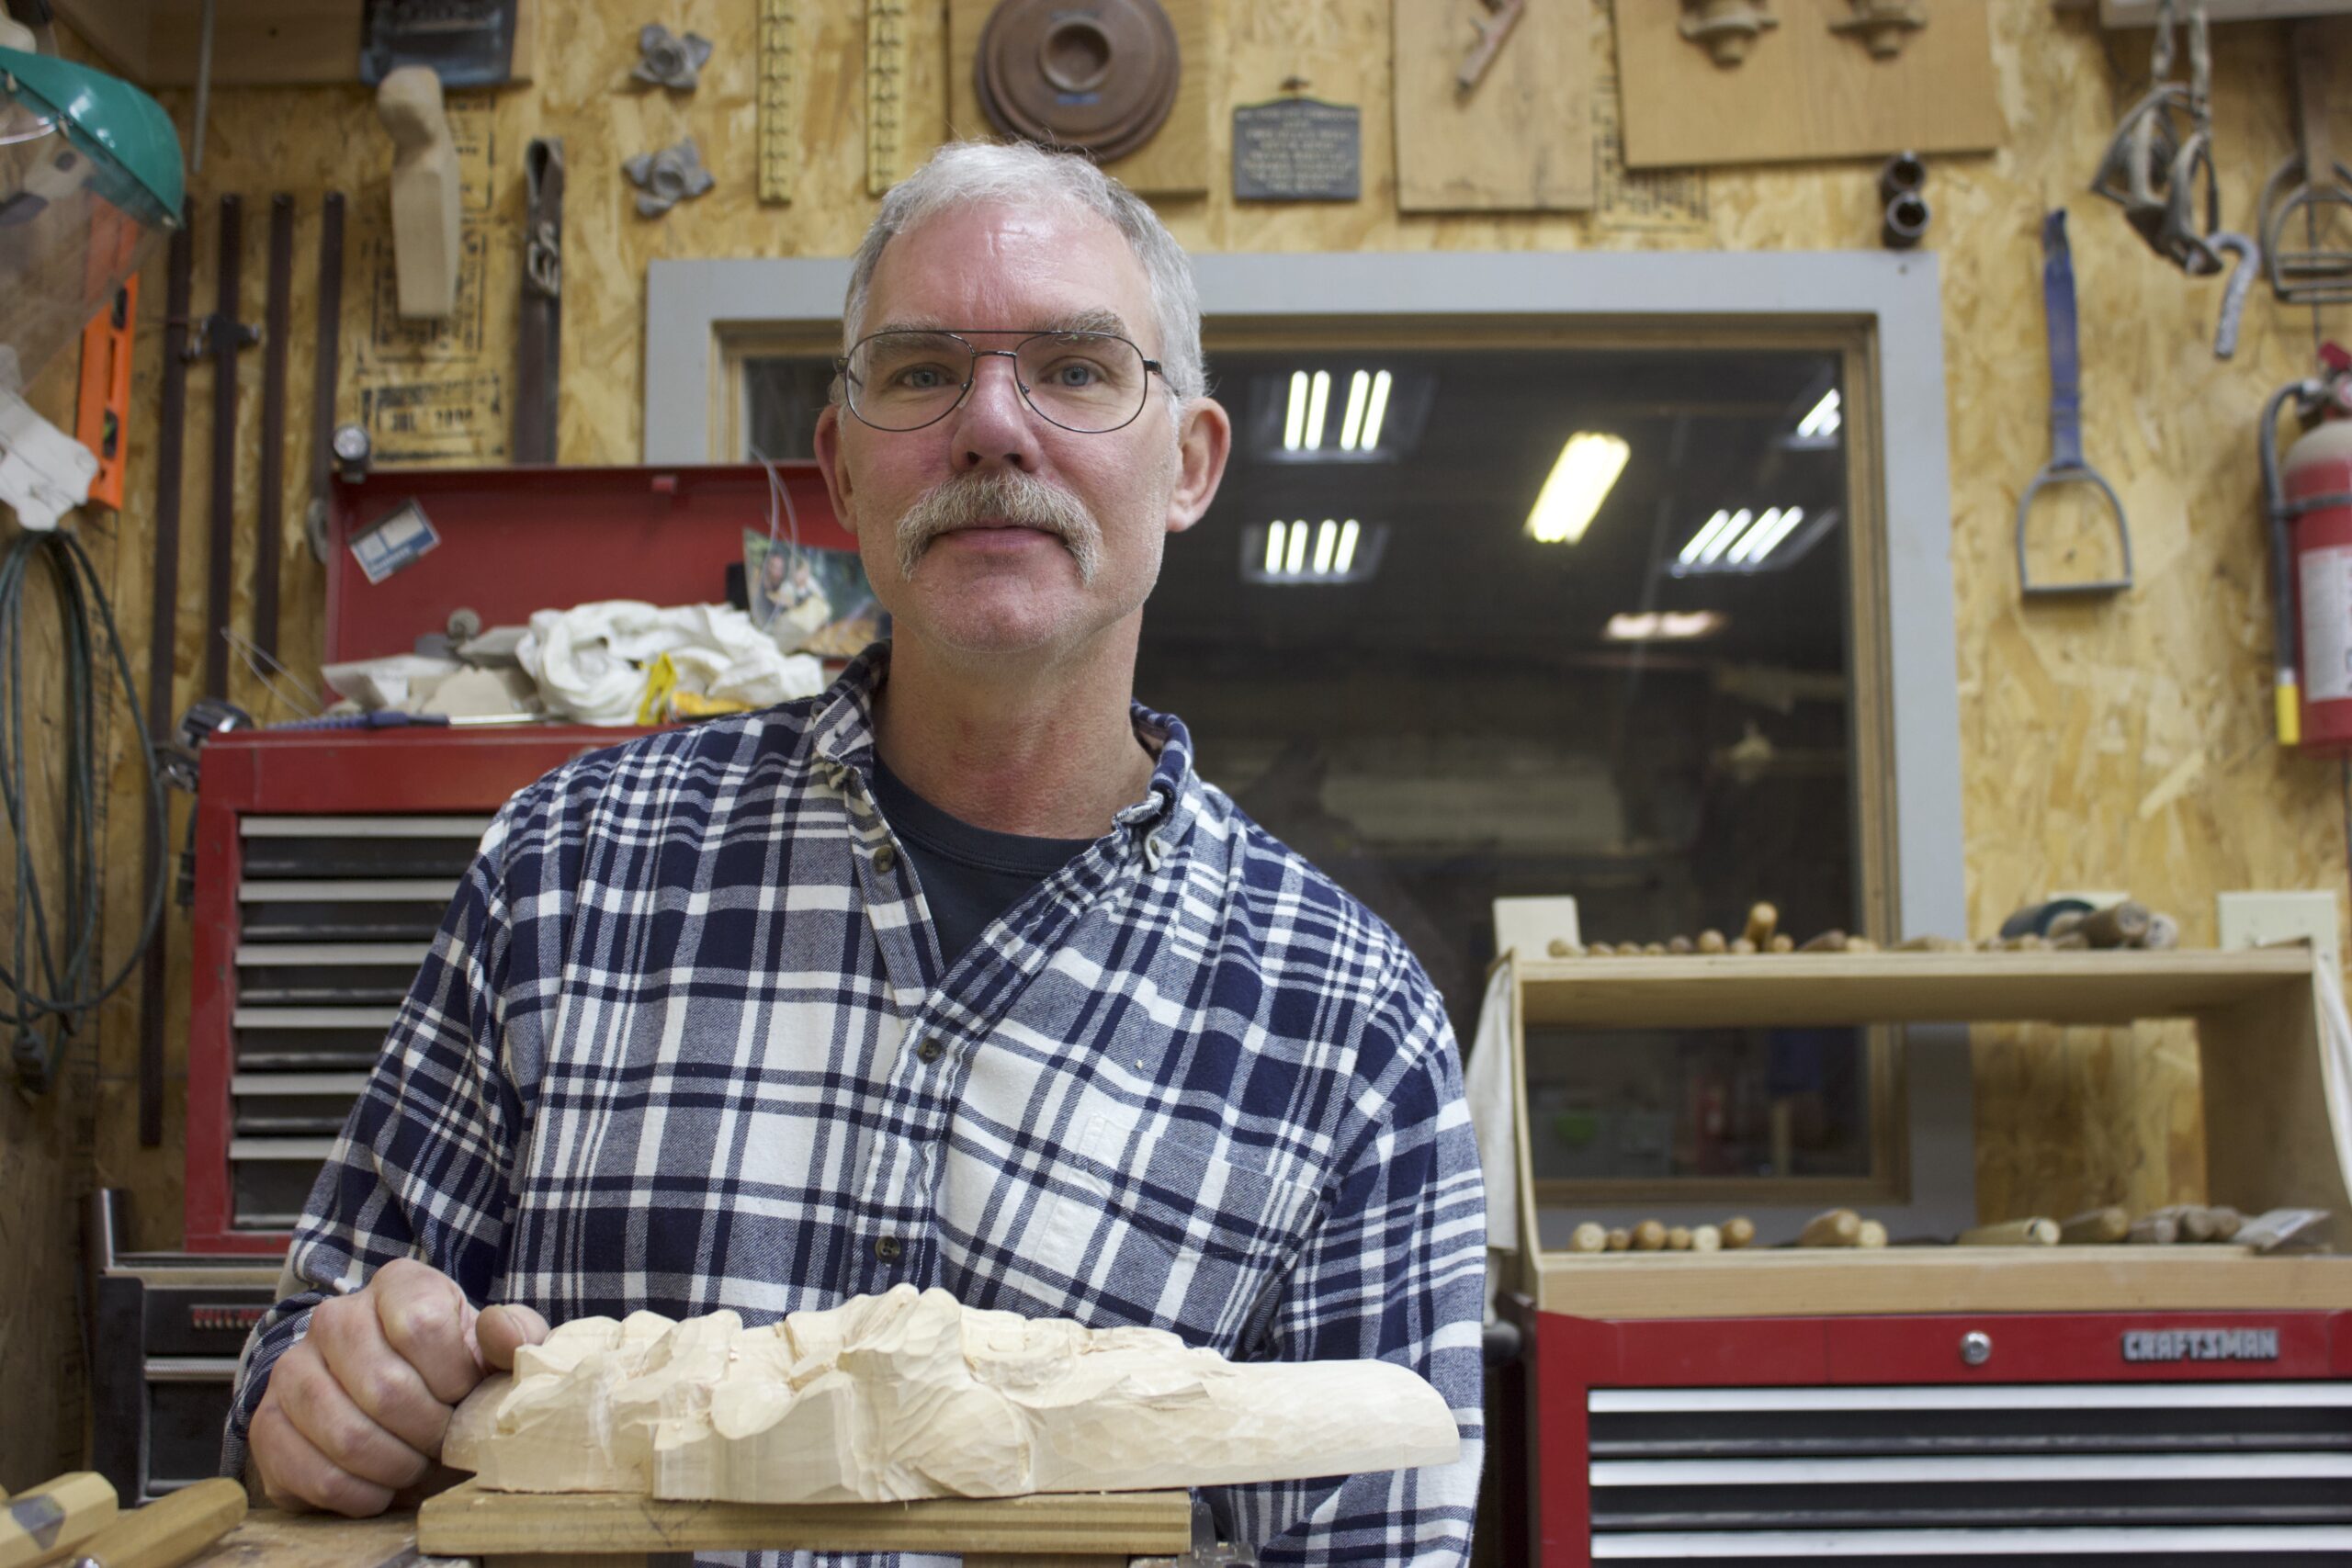 A photo of an older man with light skin tone, glasses, and a mustache in a wood shop